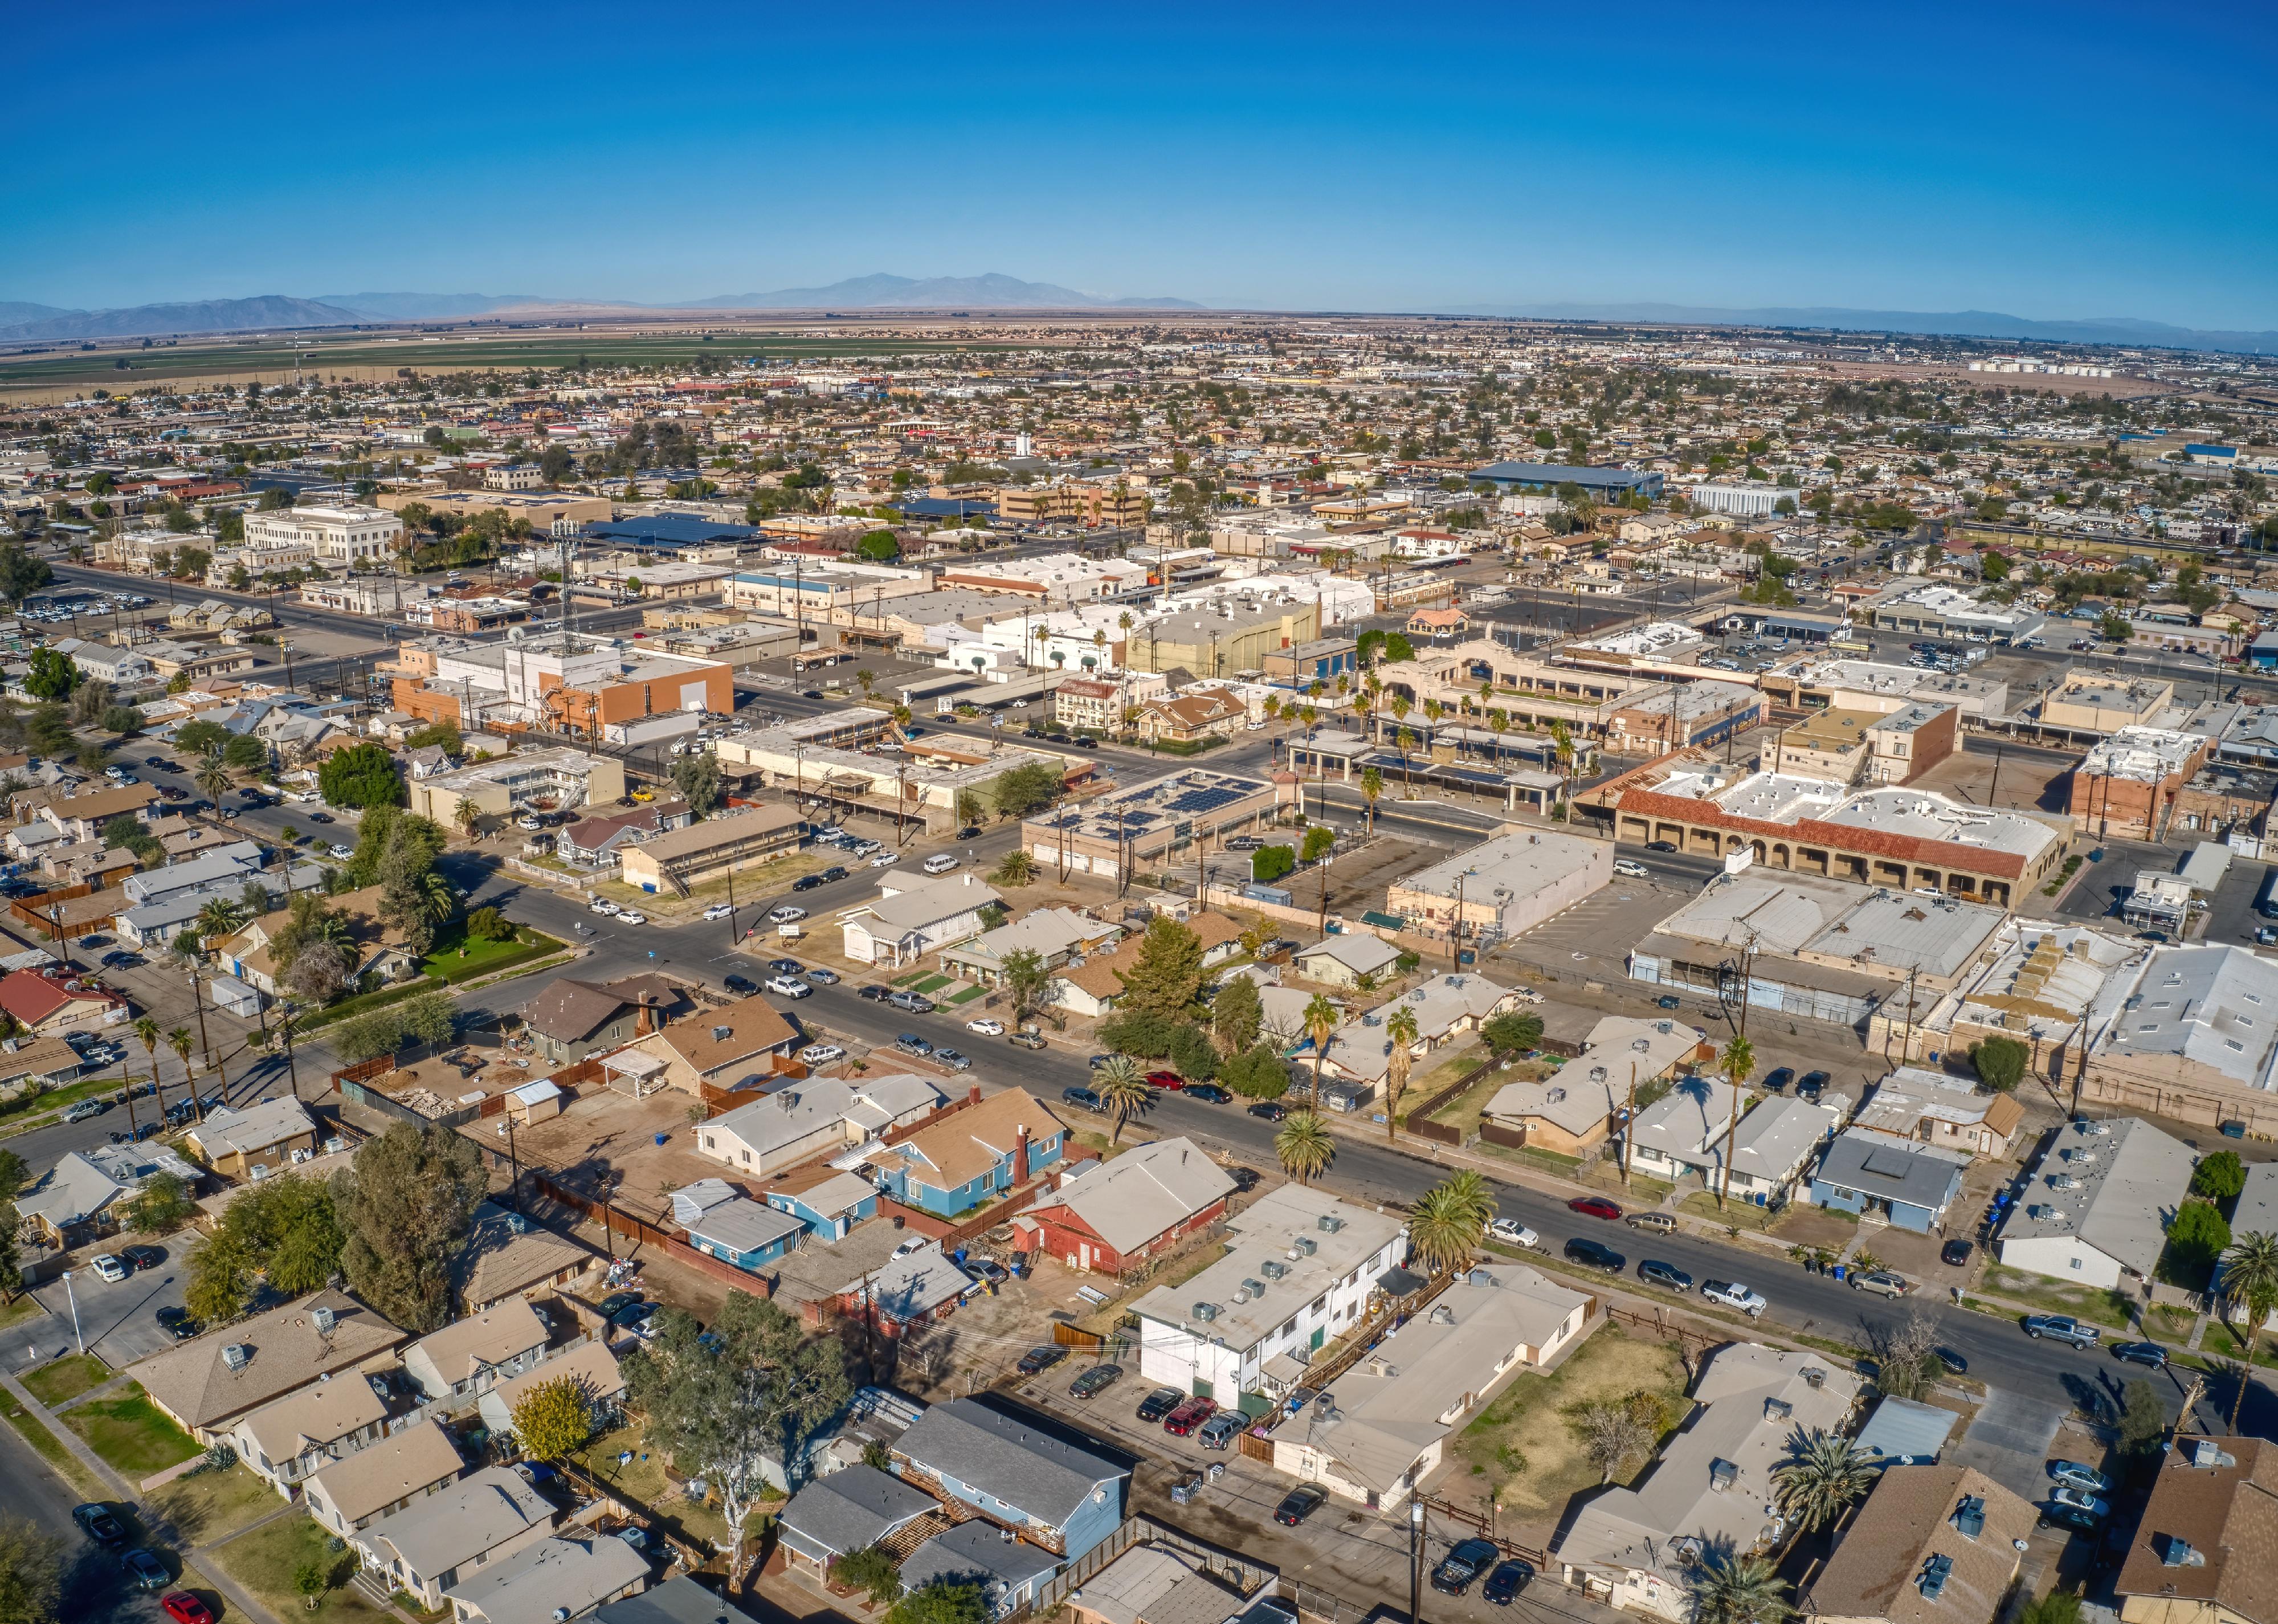 Aerial view of downtown El Centro in the Imperial Valley.